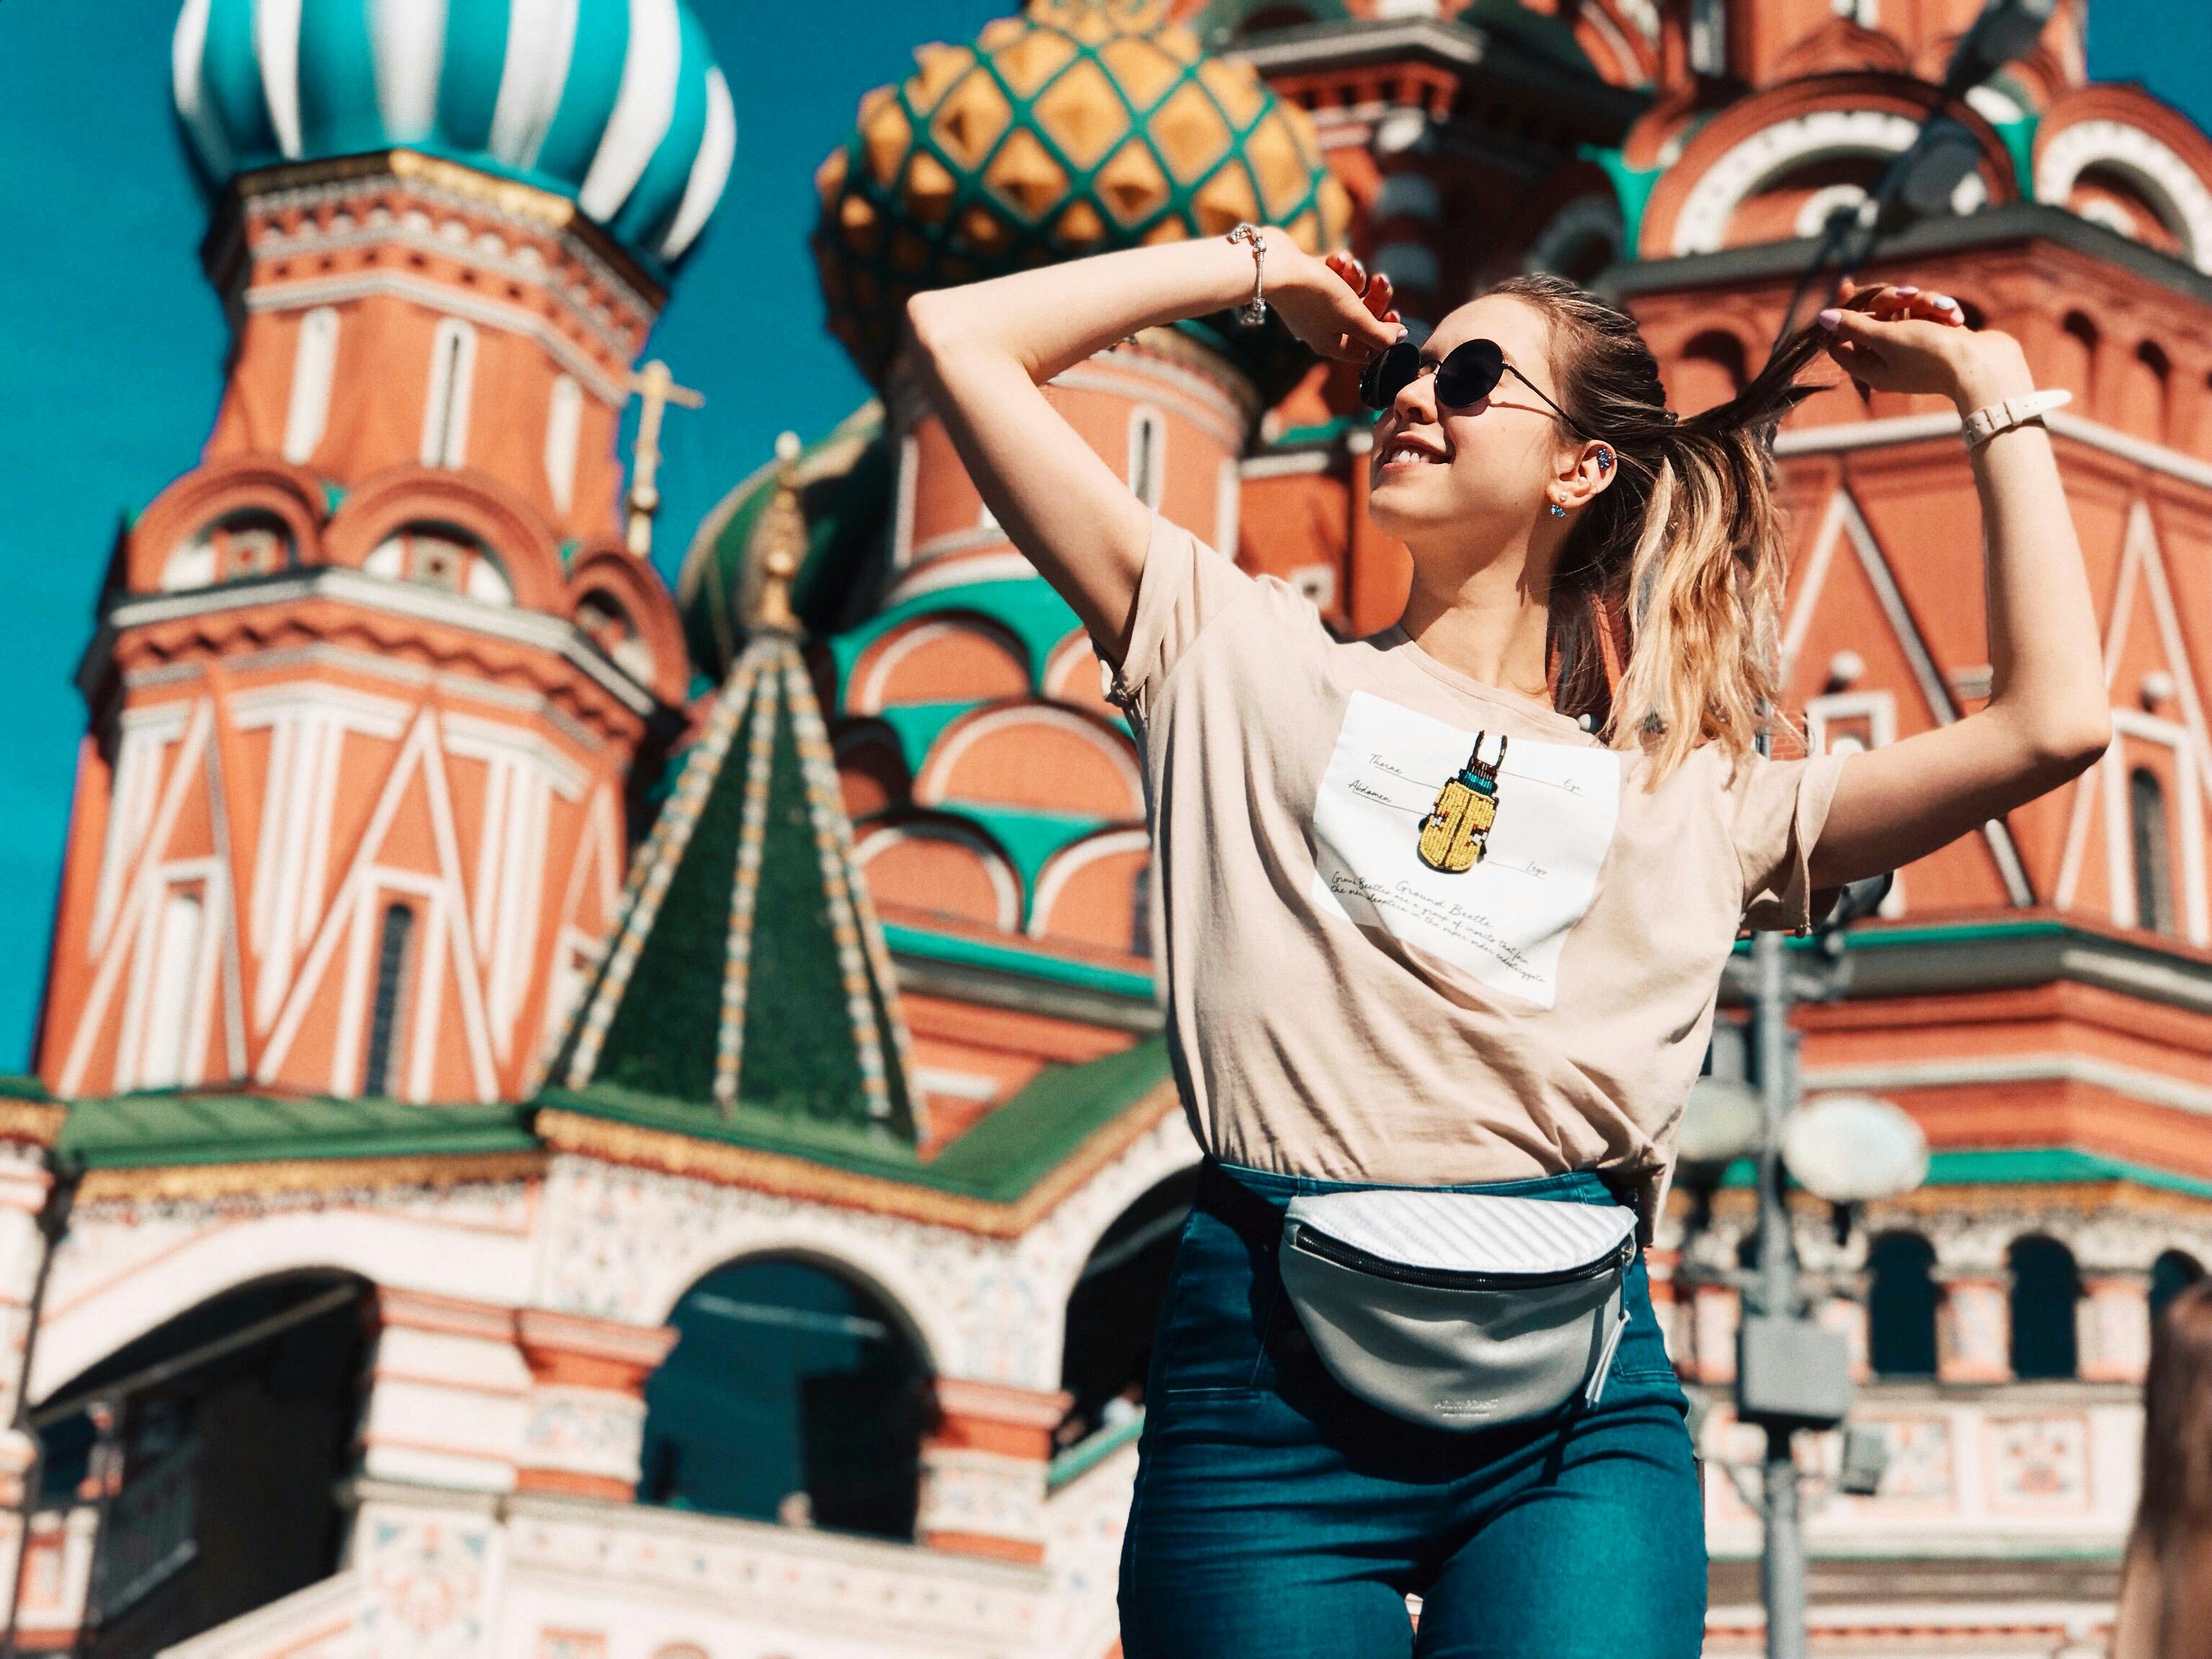 Photo of Woman Dancing With Saint Basil's Cathedral in Moscow, Russia in the Background